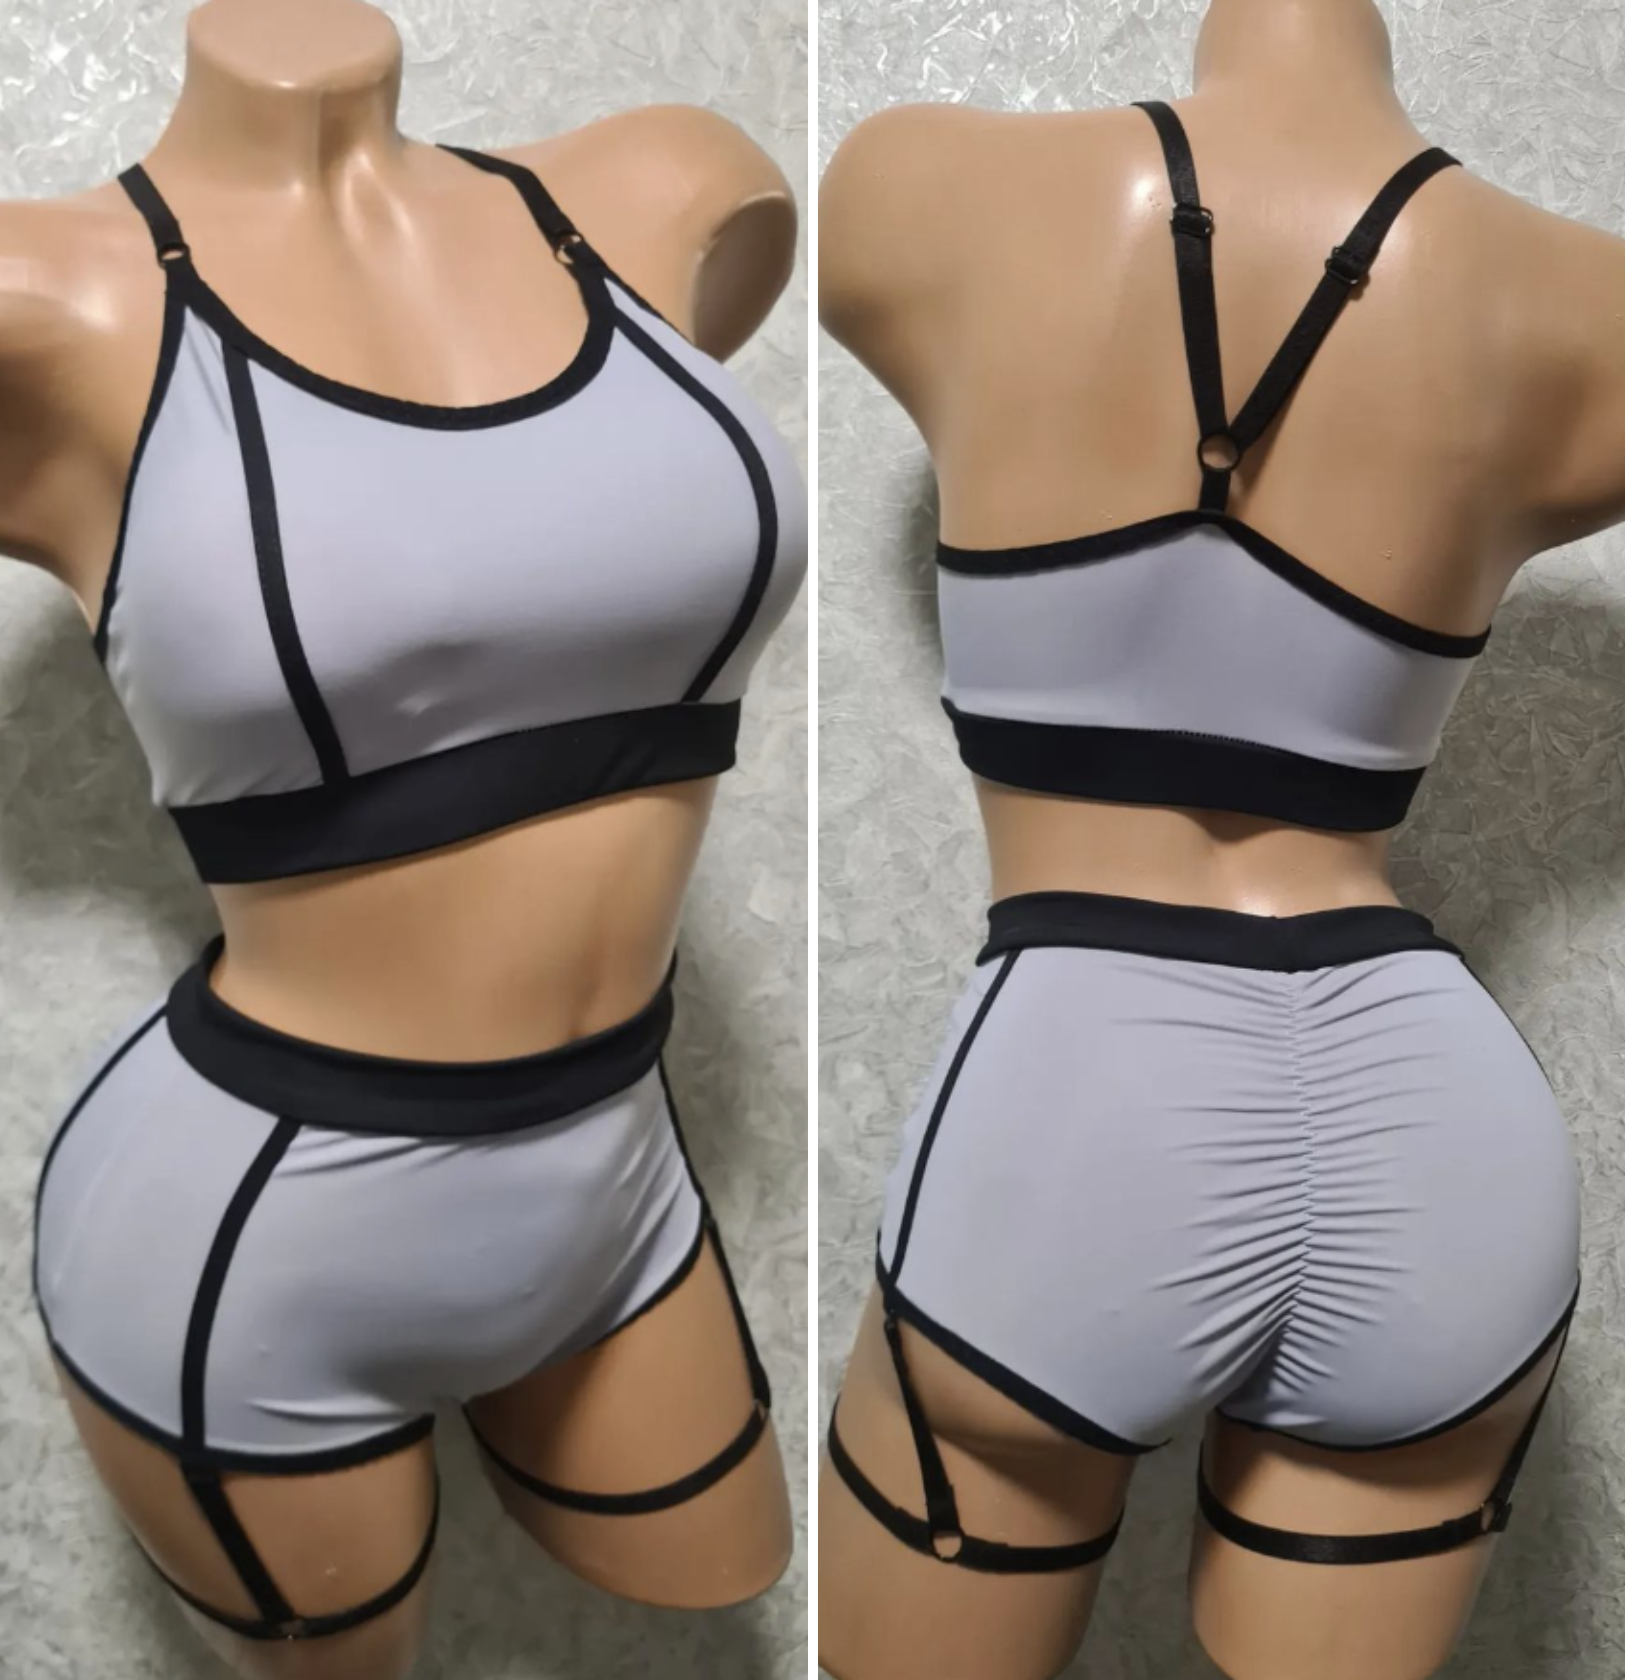 Pole Dance Wear Top and Shorts, Workout Outfit, Polewear Suit, Twerk Set  Top and Shorts, Workout Short and Bra, Strip Plastic Shorts and Top 